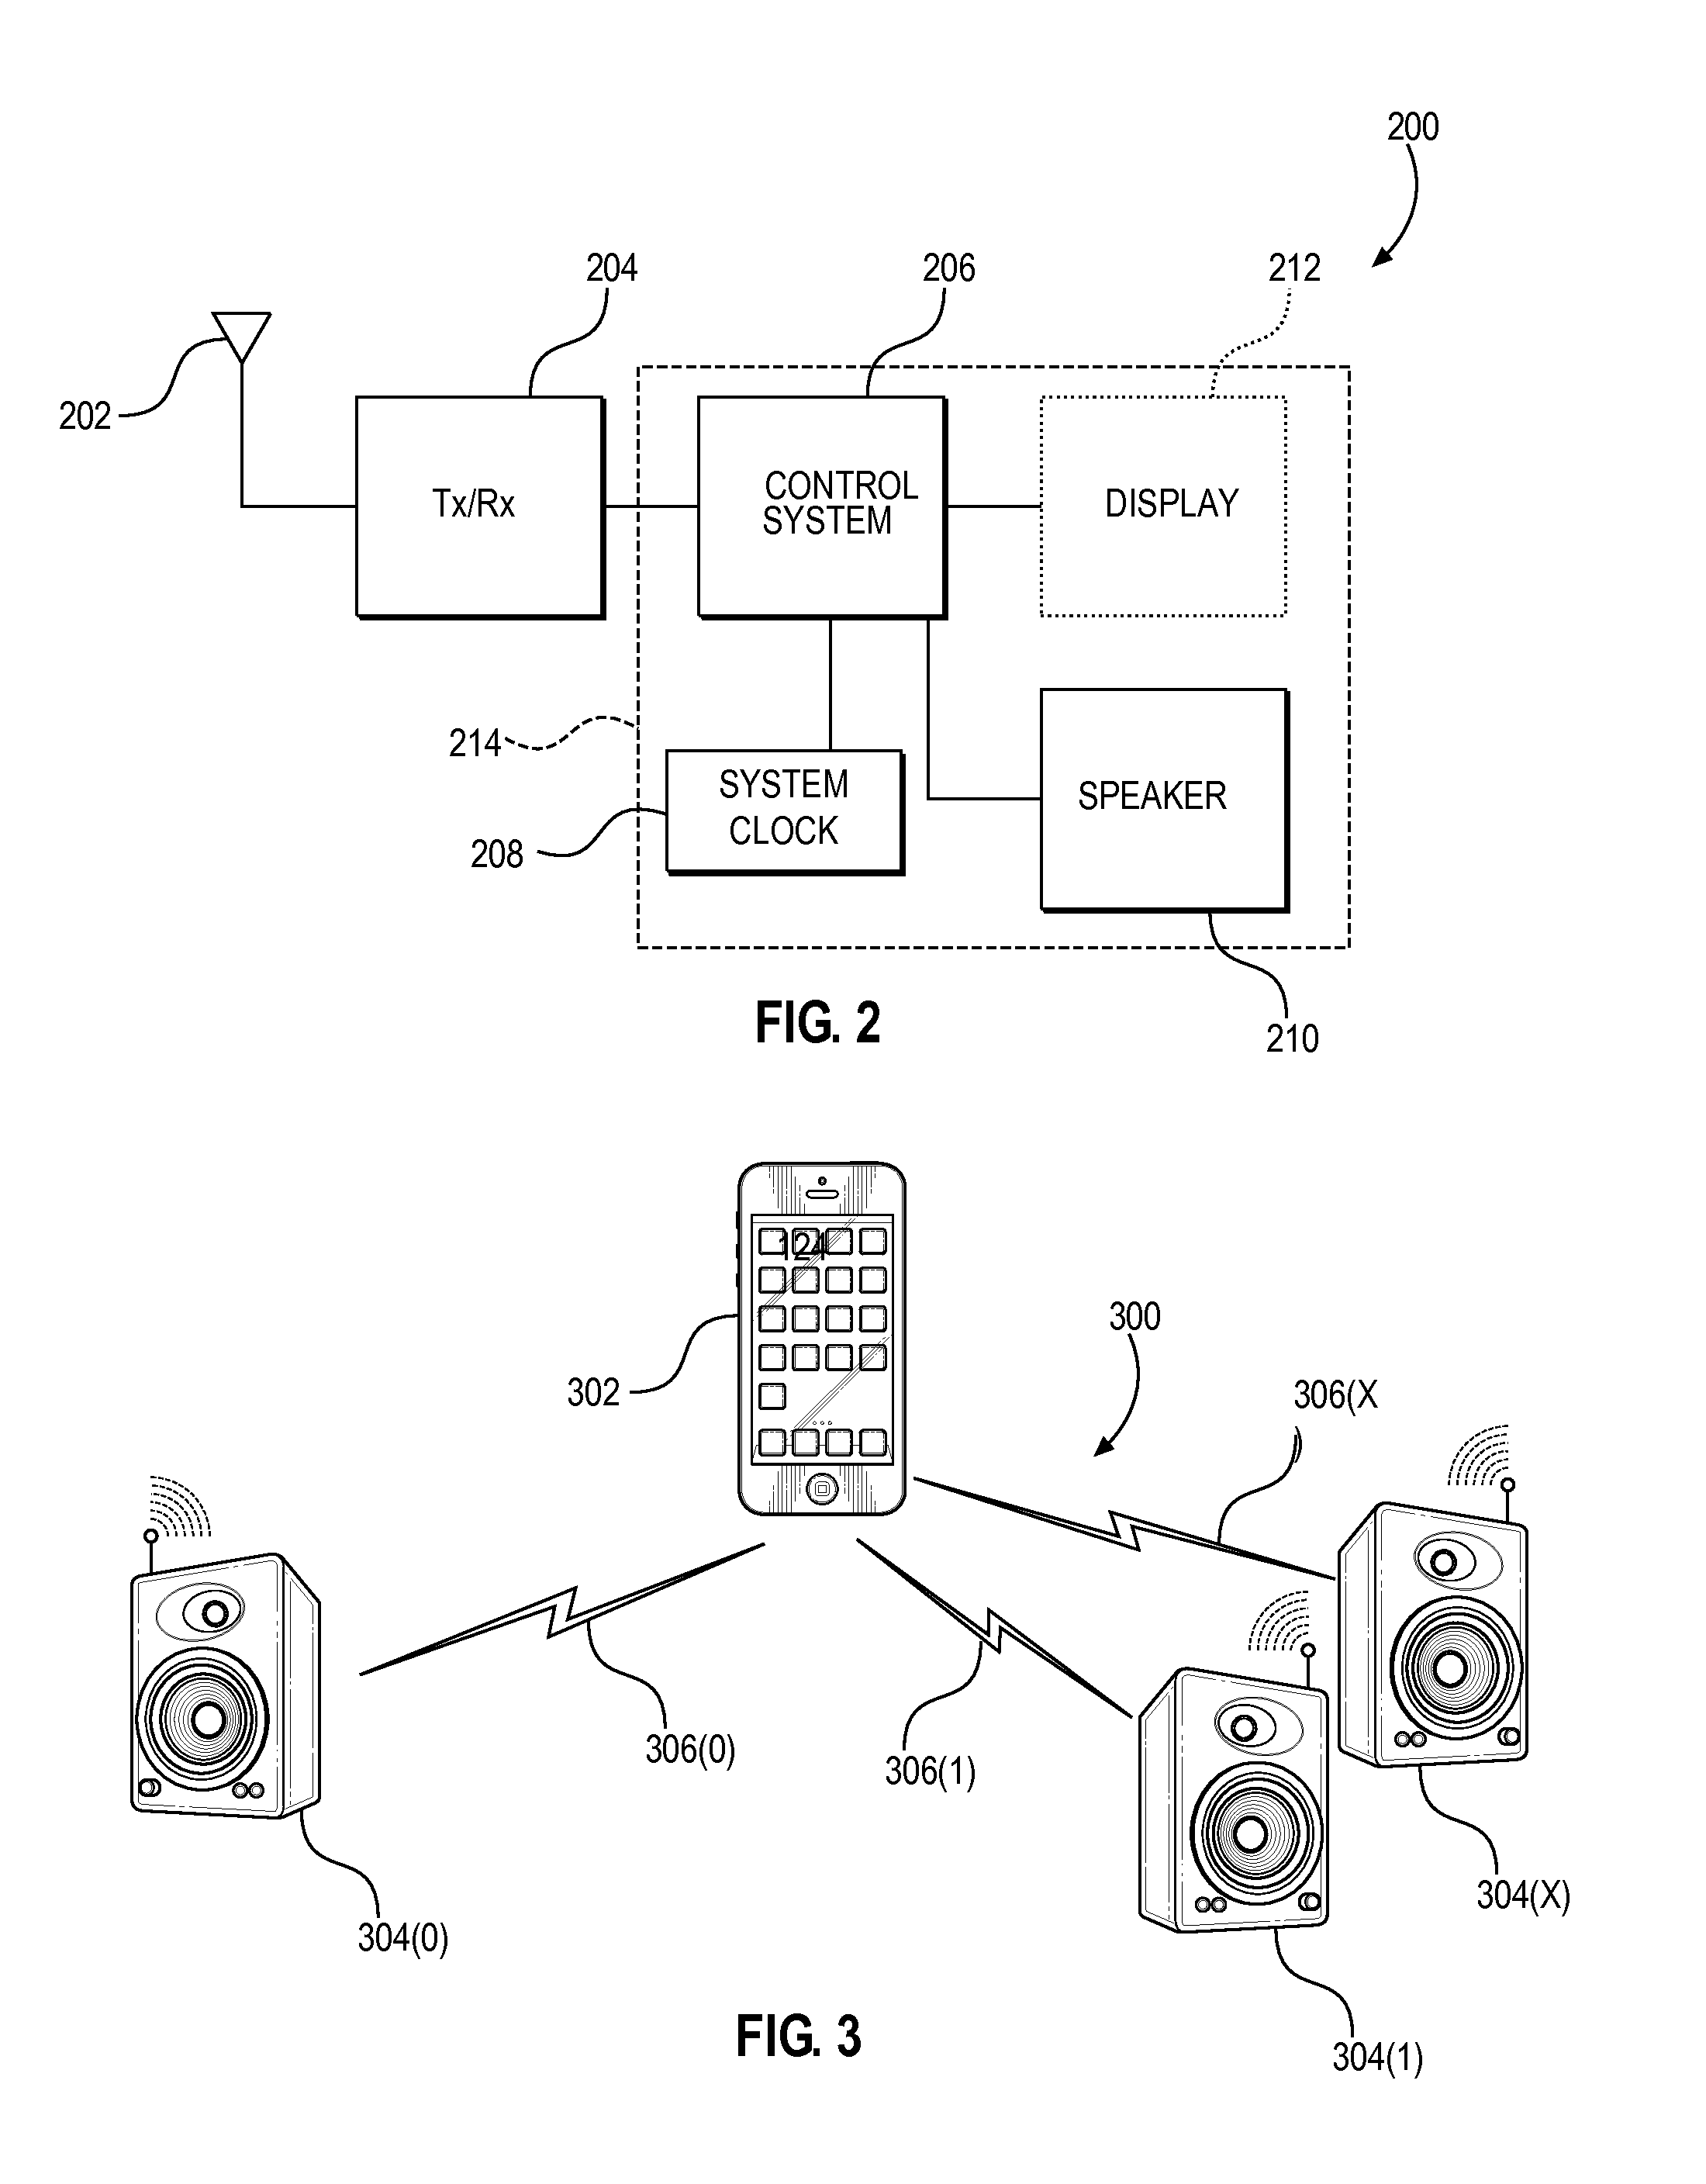 Providing precision timing protocol (PTP) timing and clock synchronization for wireless multimedia devices